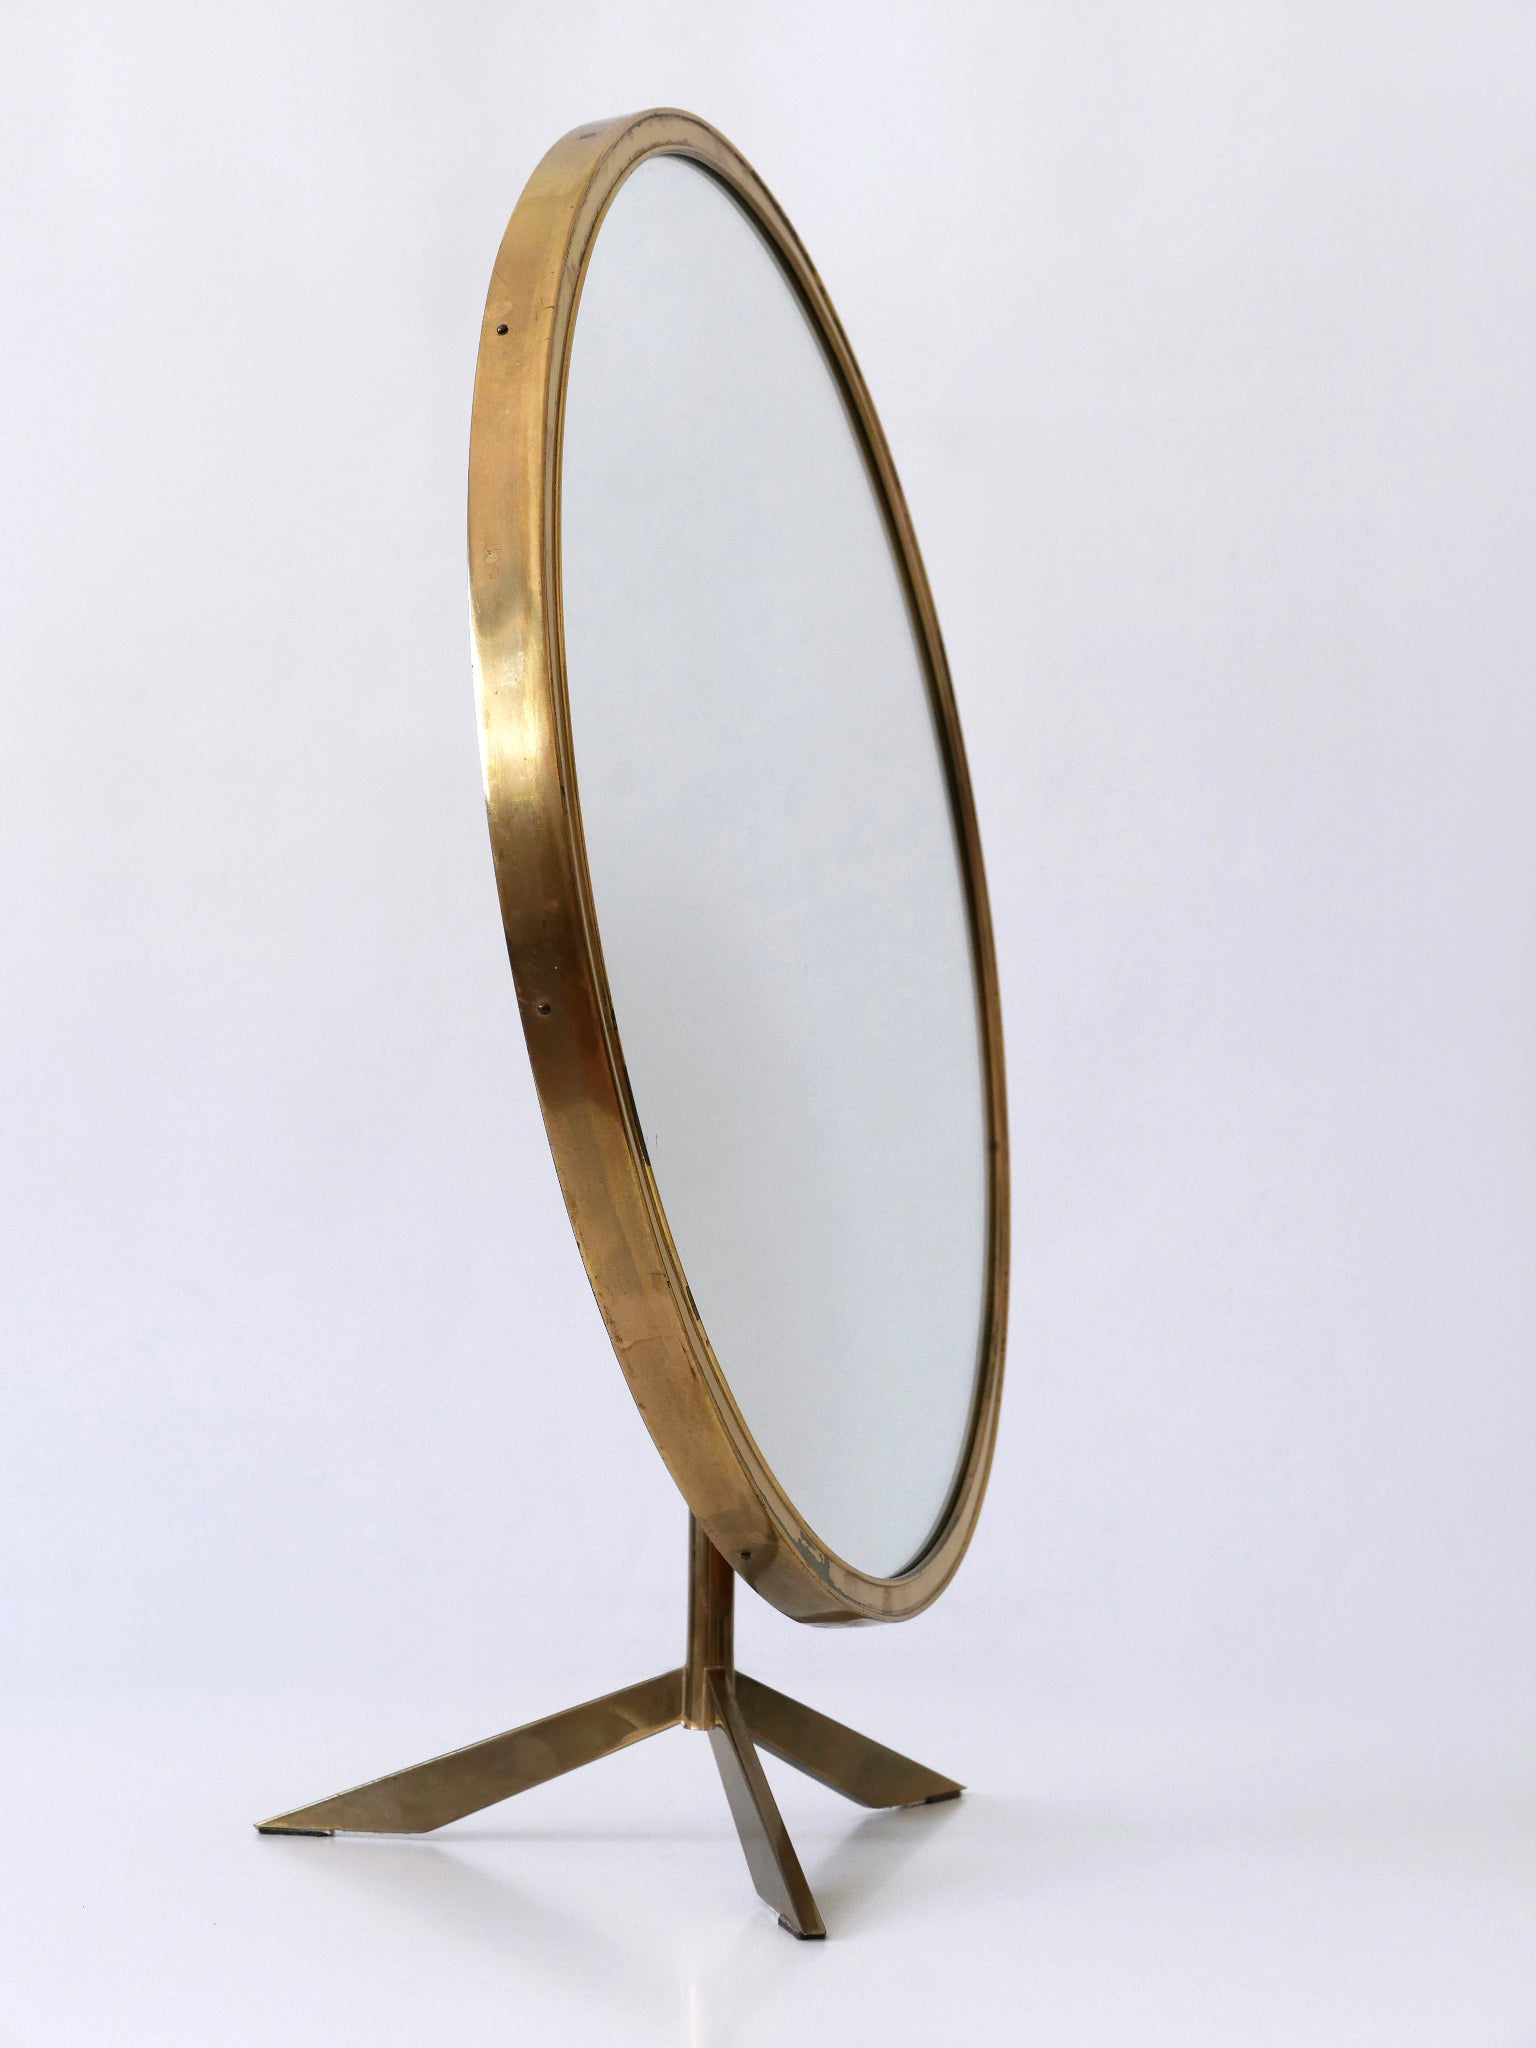 Elegant Mid-Century Modern Wall or Vanity Mirror by Zierform Germany 1950s For Sale 1